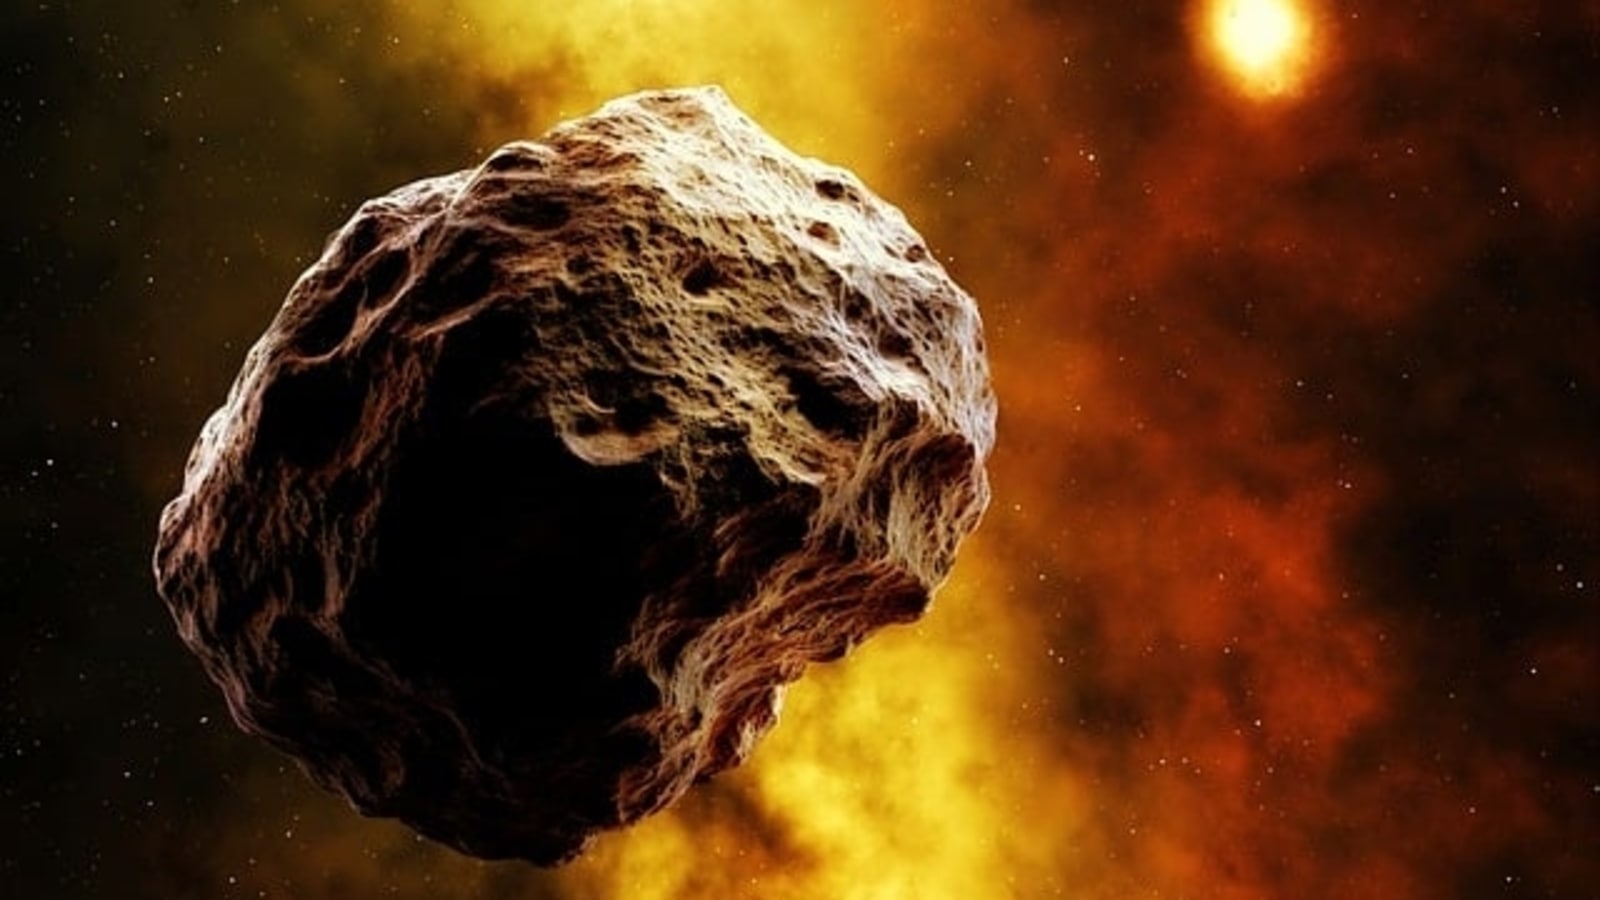 Asteroid watch: Building-sized asteroid set to pass Earth today by close margin, reveals NASA